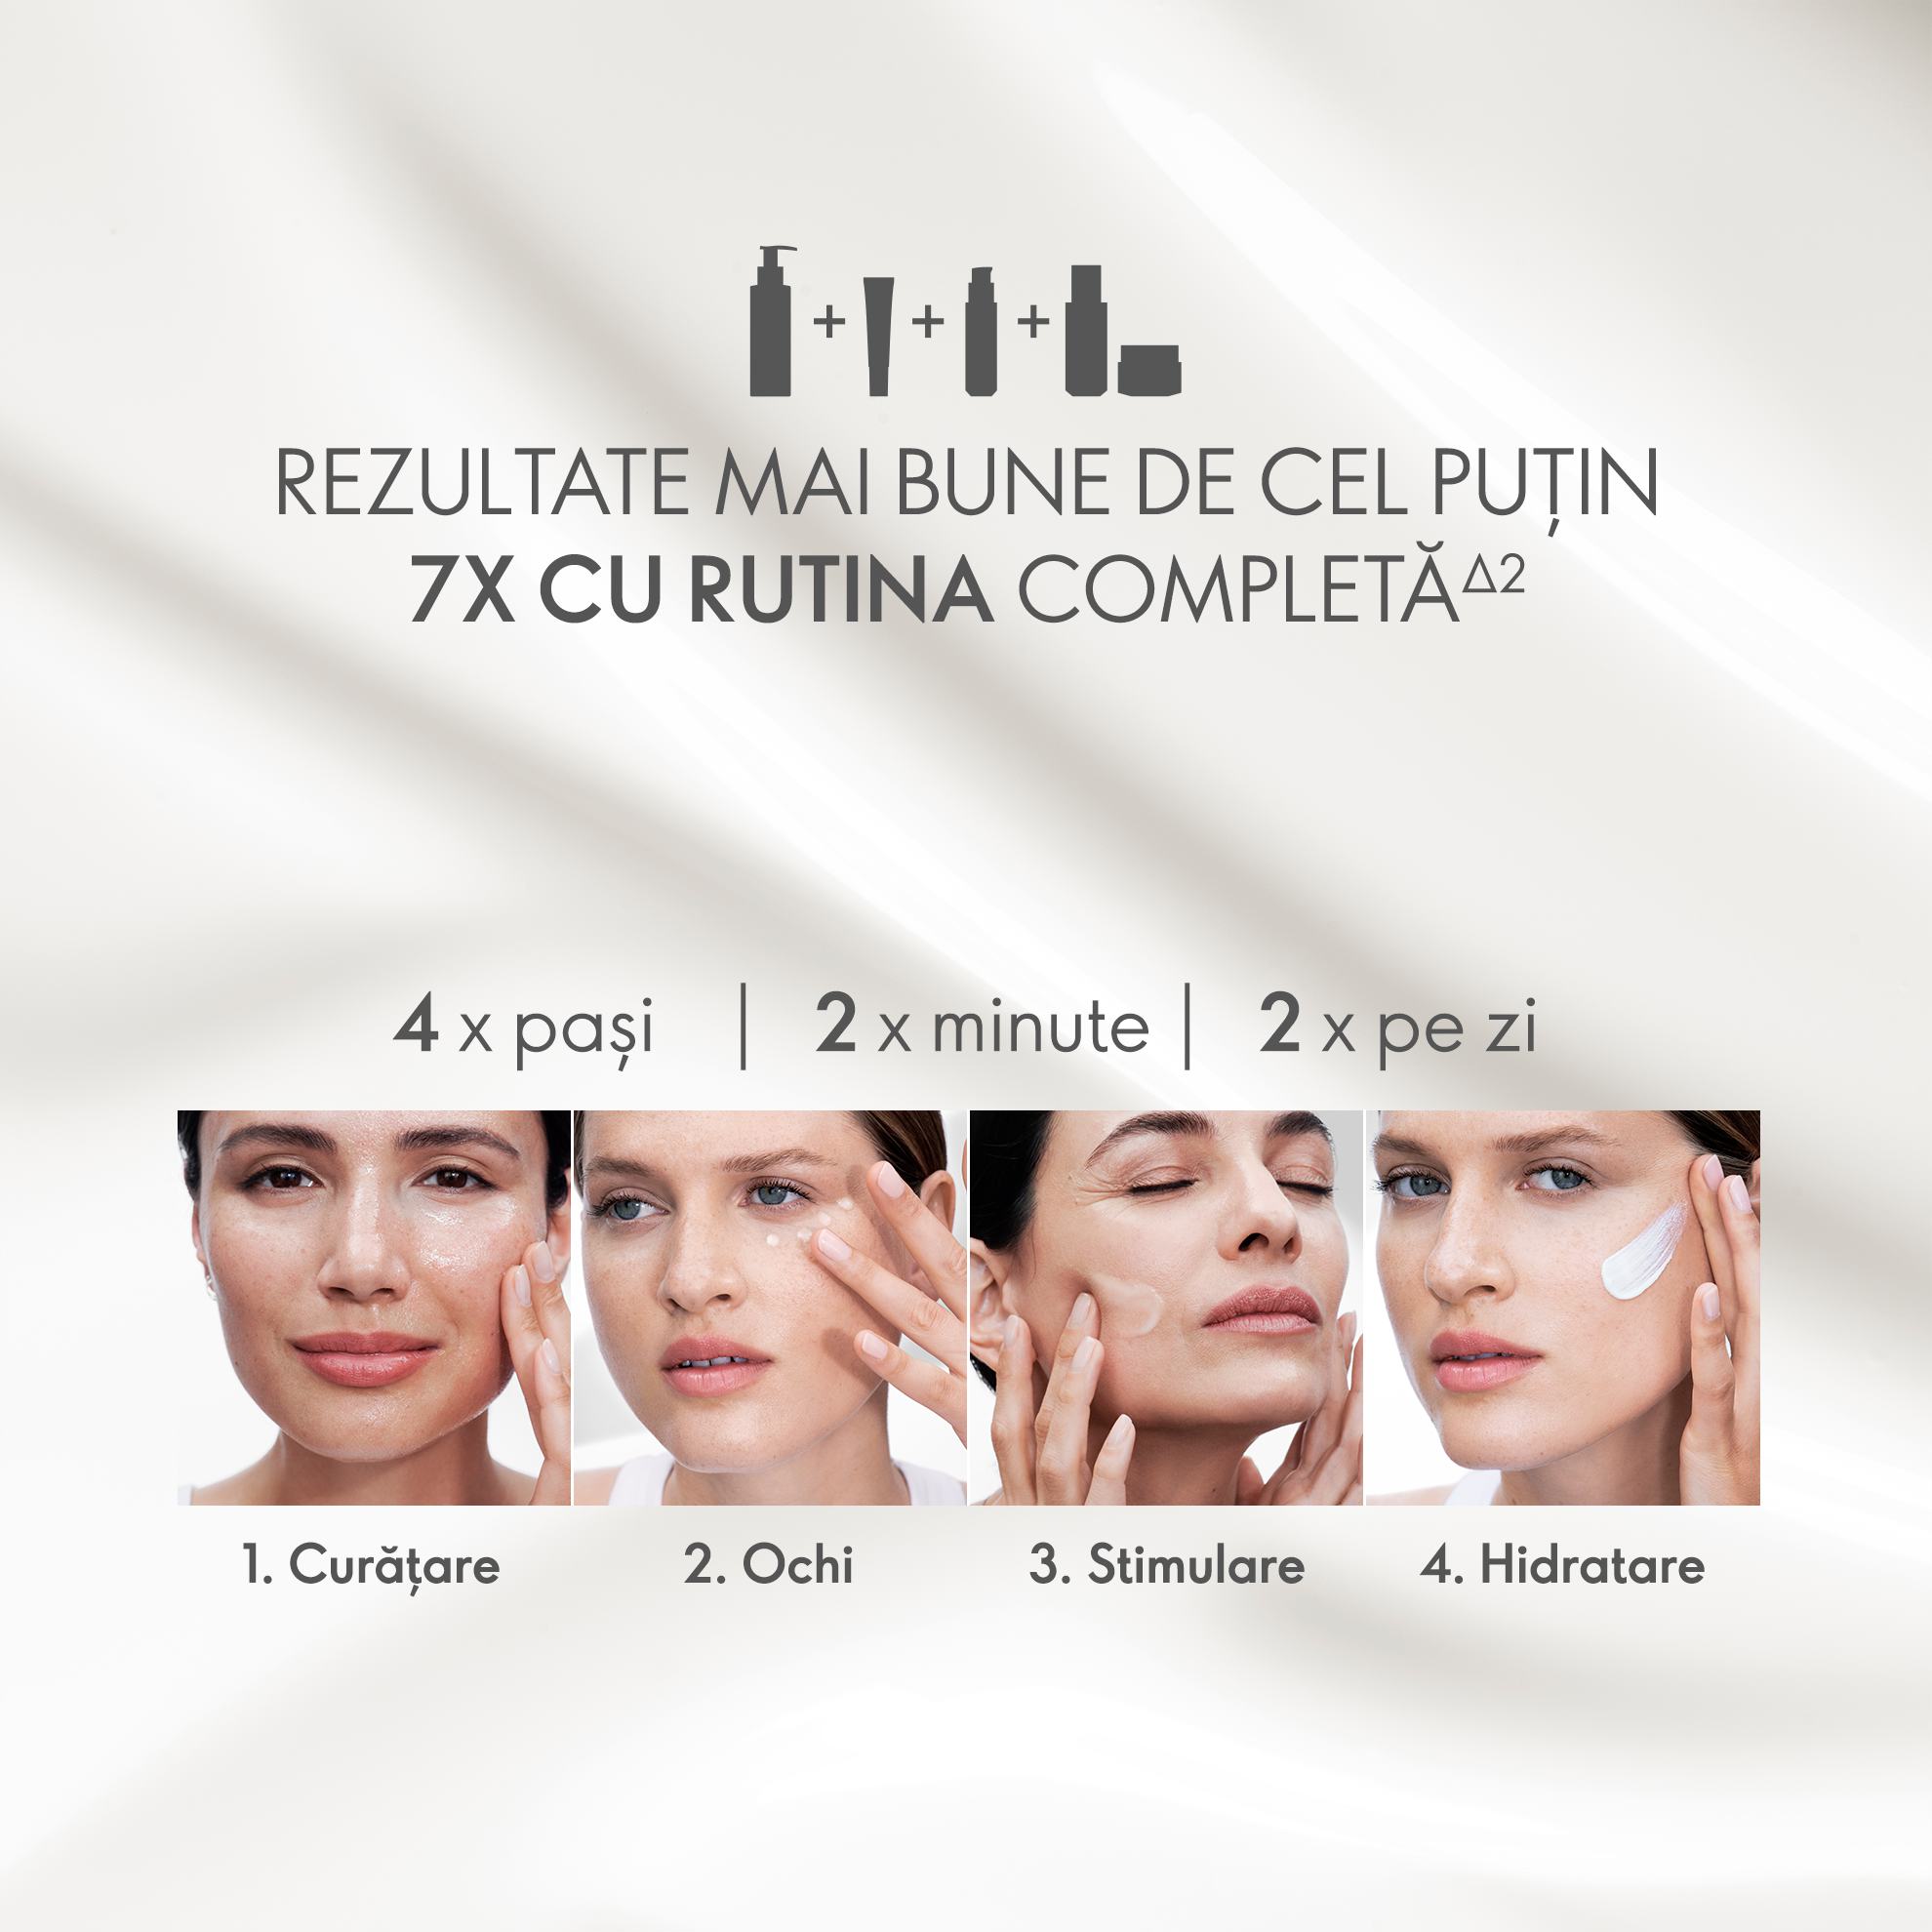 https://media-cdn.oriflame.com/productImage?externalMediaId=product-management-media%2fProducts%2f45590%2fMD%2f45590_5.png&id=17669419&version=1